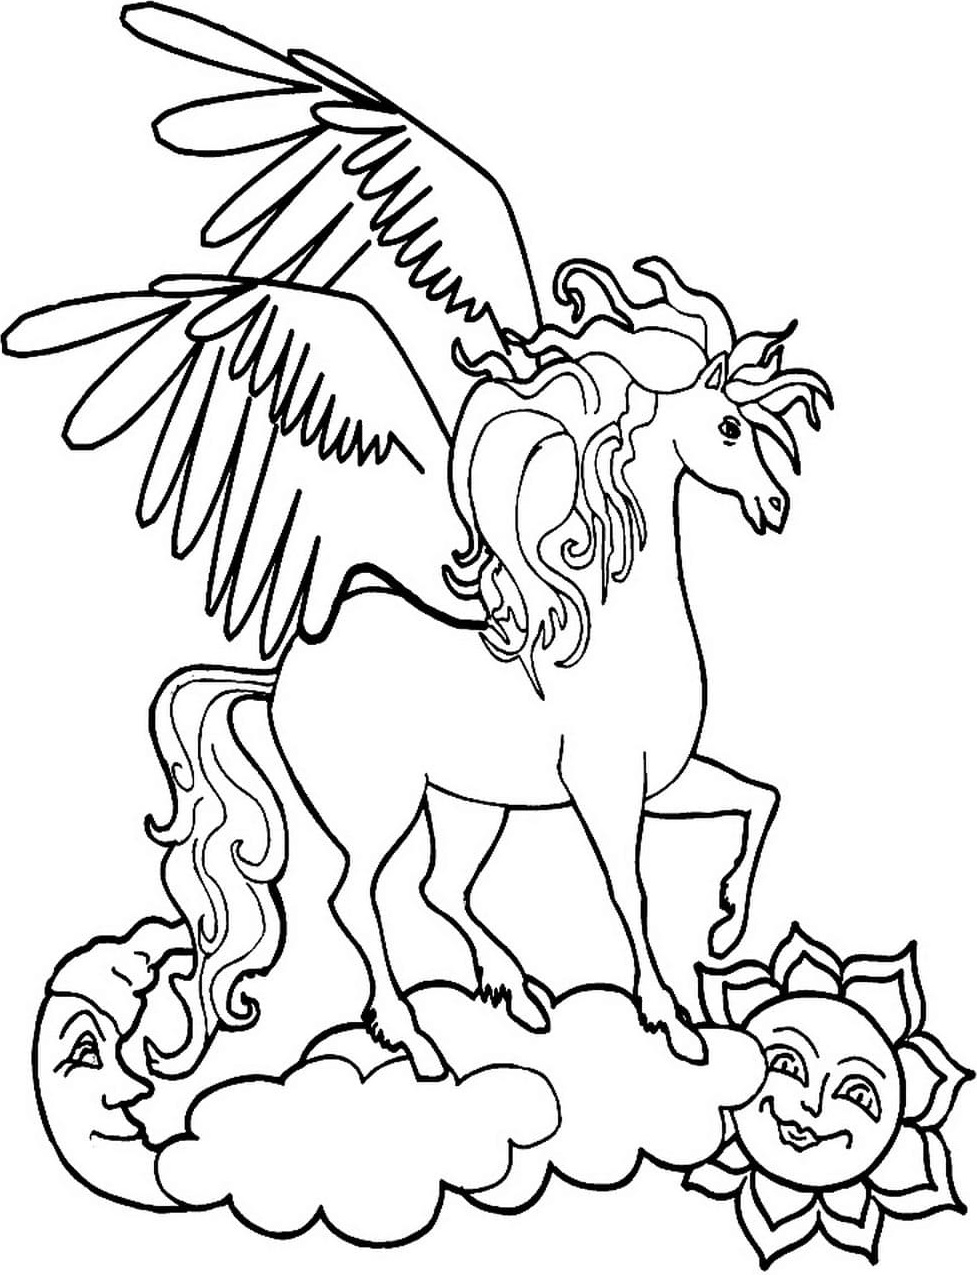 Unicorn Standing On Cloud Coloring Page Free Printable Coloring Pages